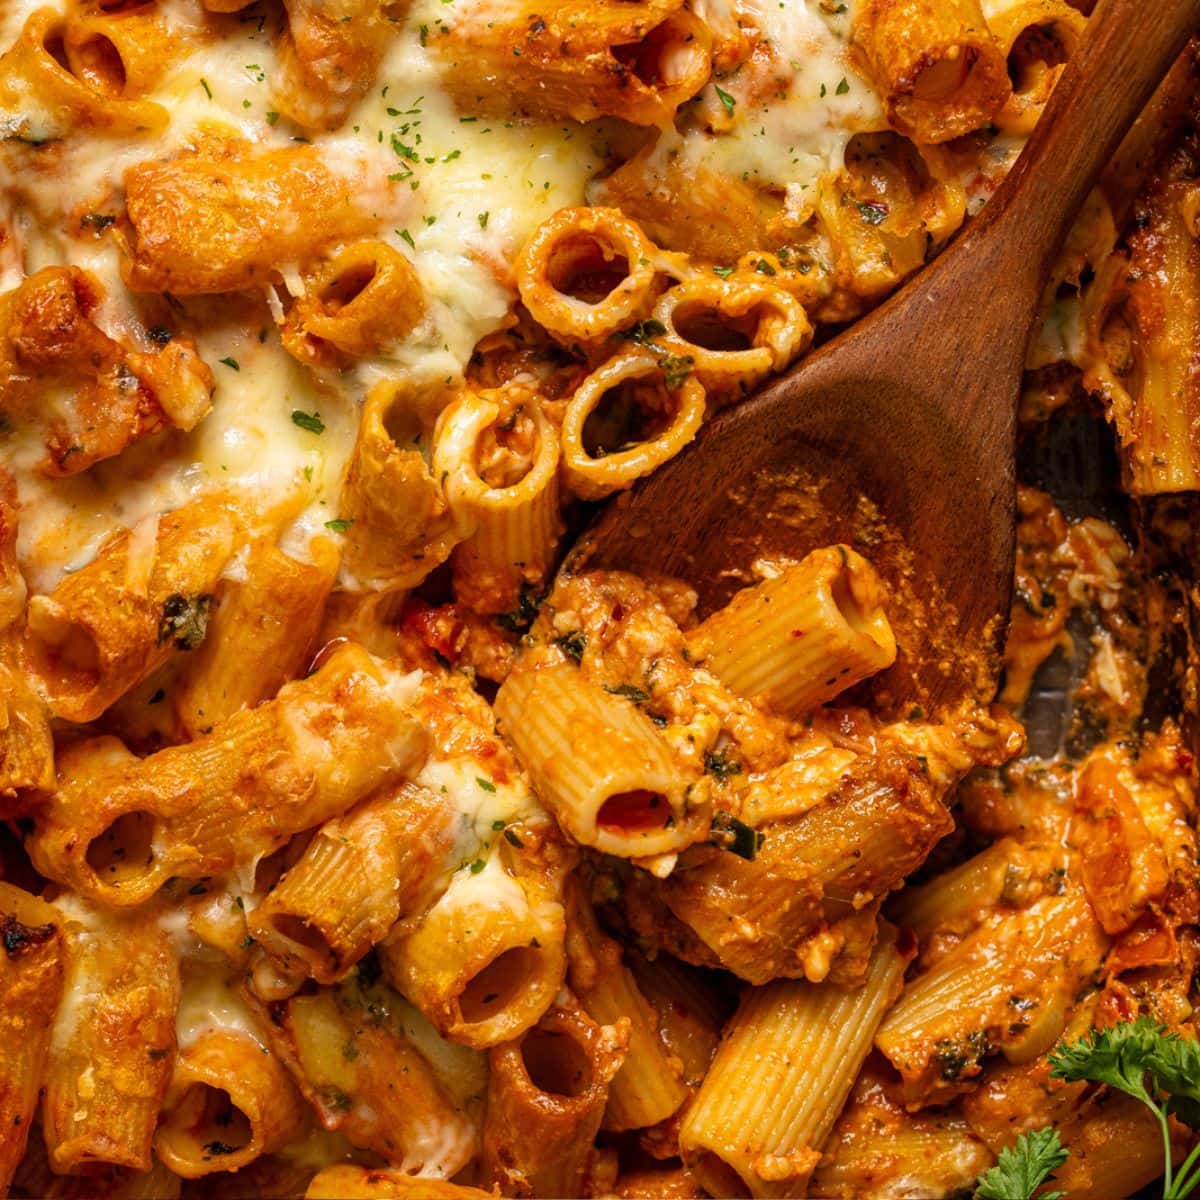 Up close shot of pasta bake with a wooden spoon.